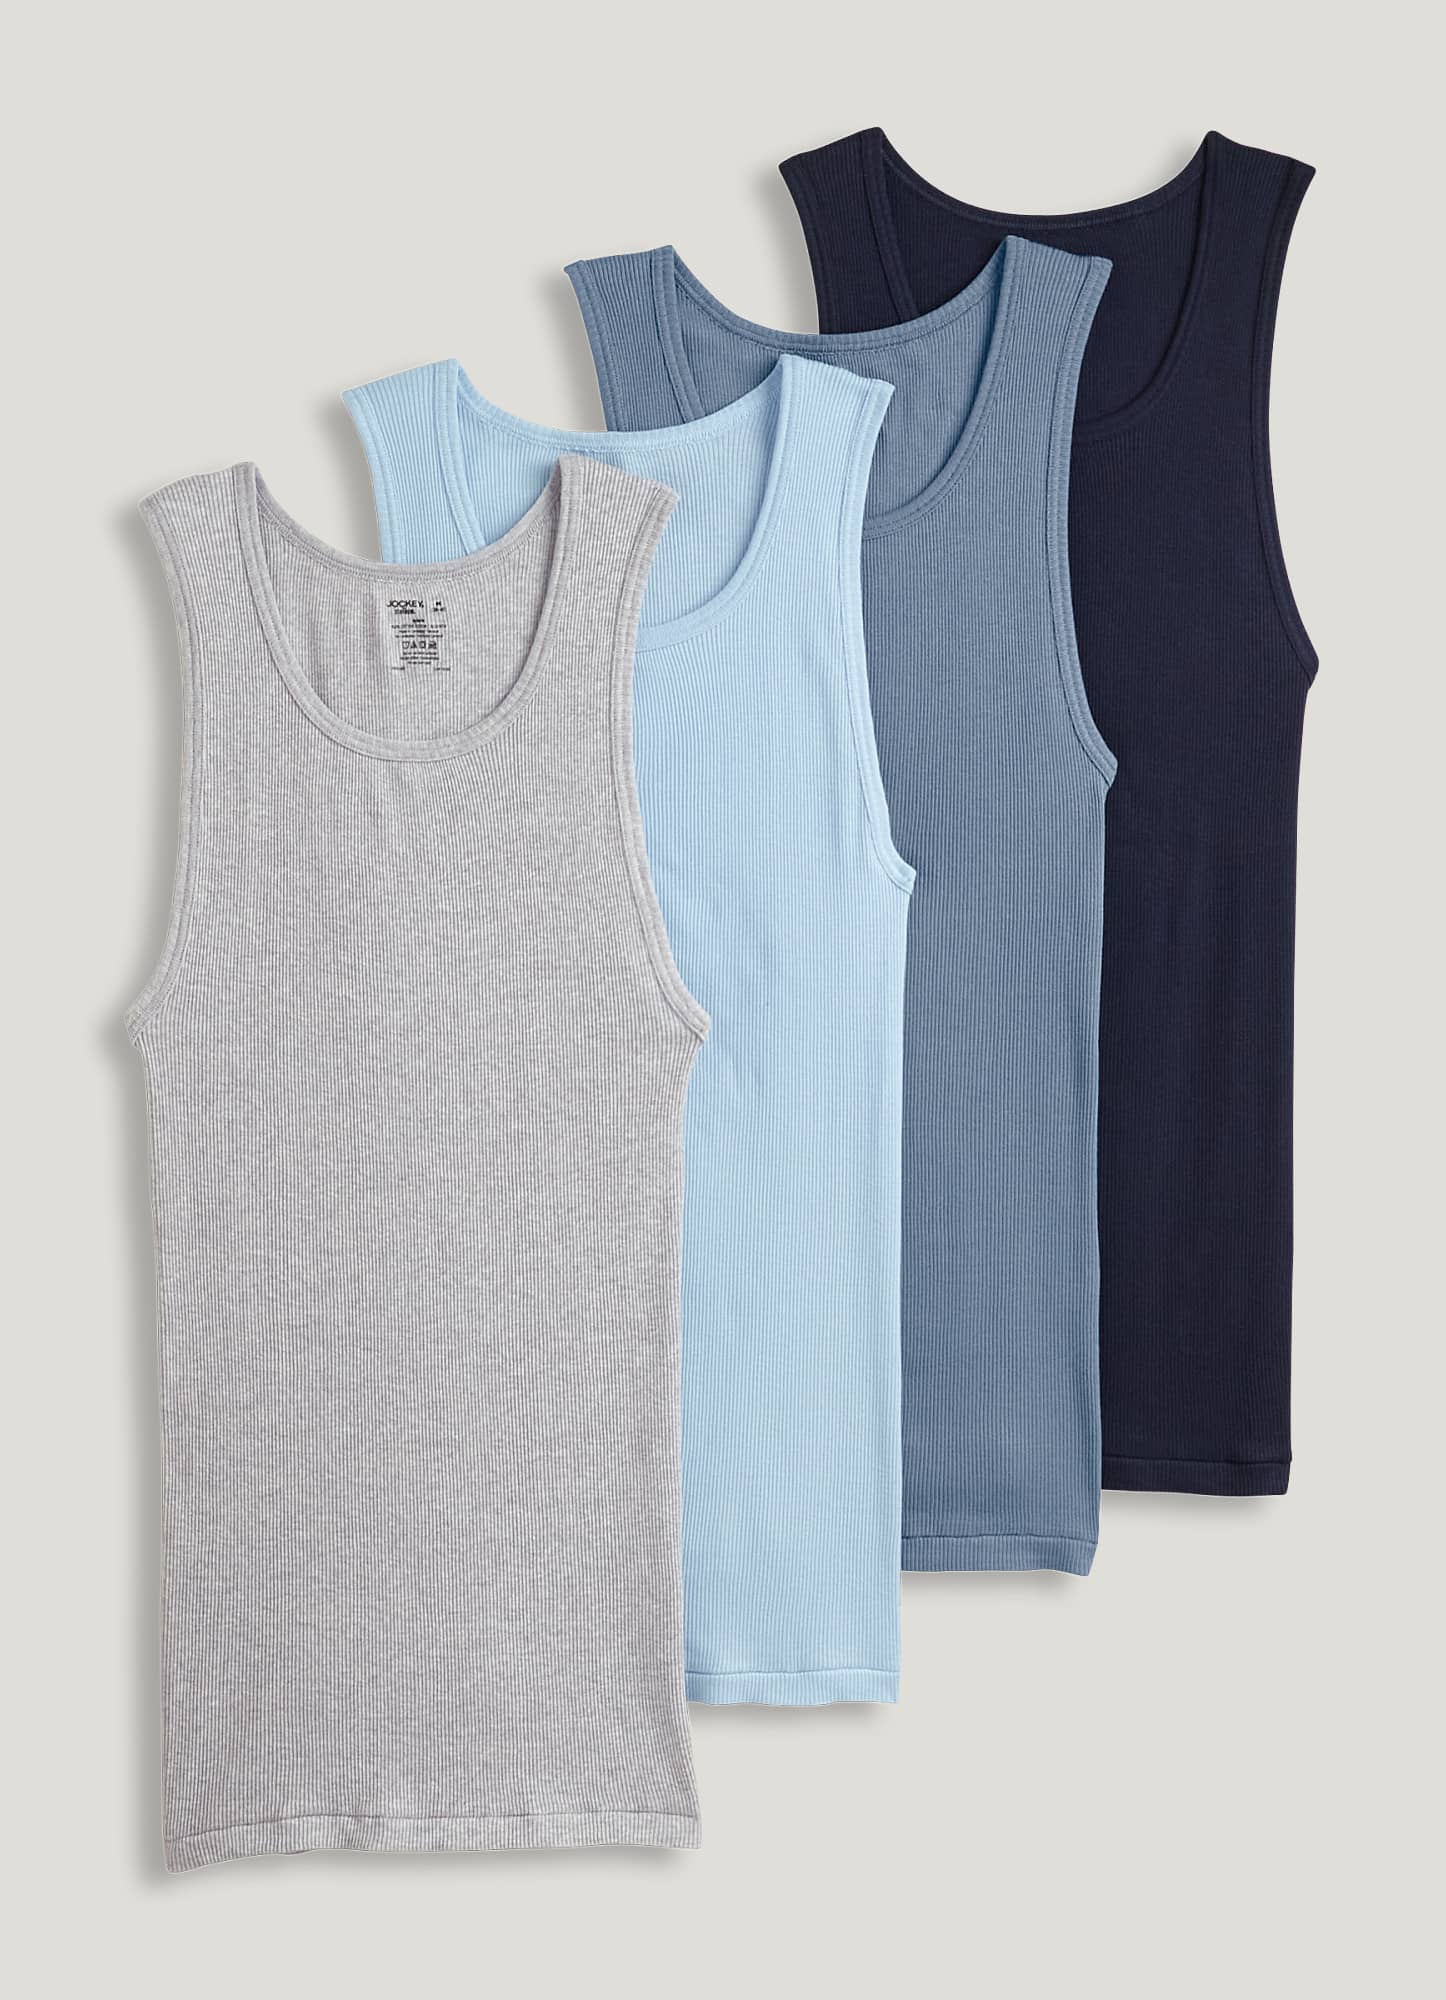 New Women's Tank Top Raceback 100% Cotton Ribbed Solid Workout Active Tee  (4Pk)